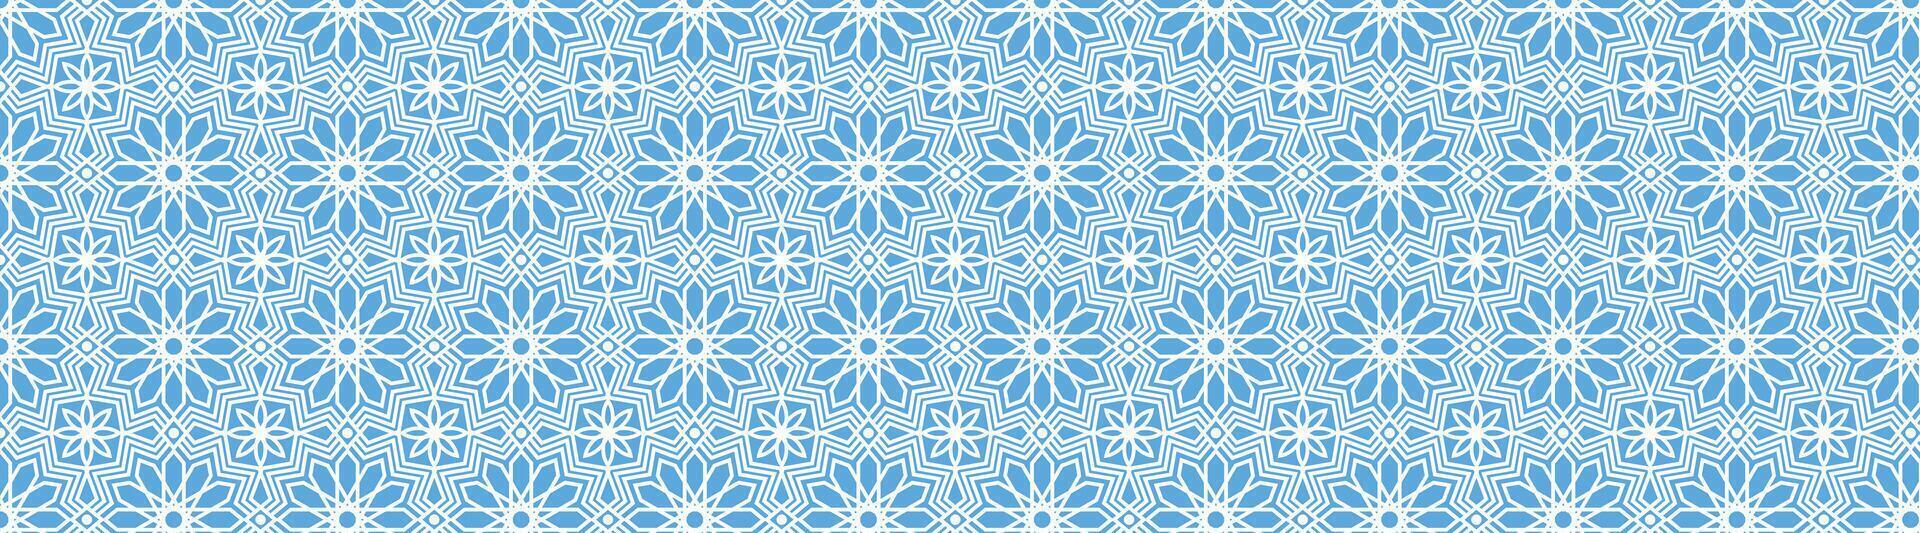 geometric pattern tile islamic seamless pattern for ramadan and eid moroccan vintage style vector